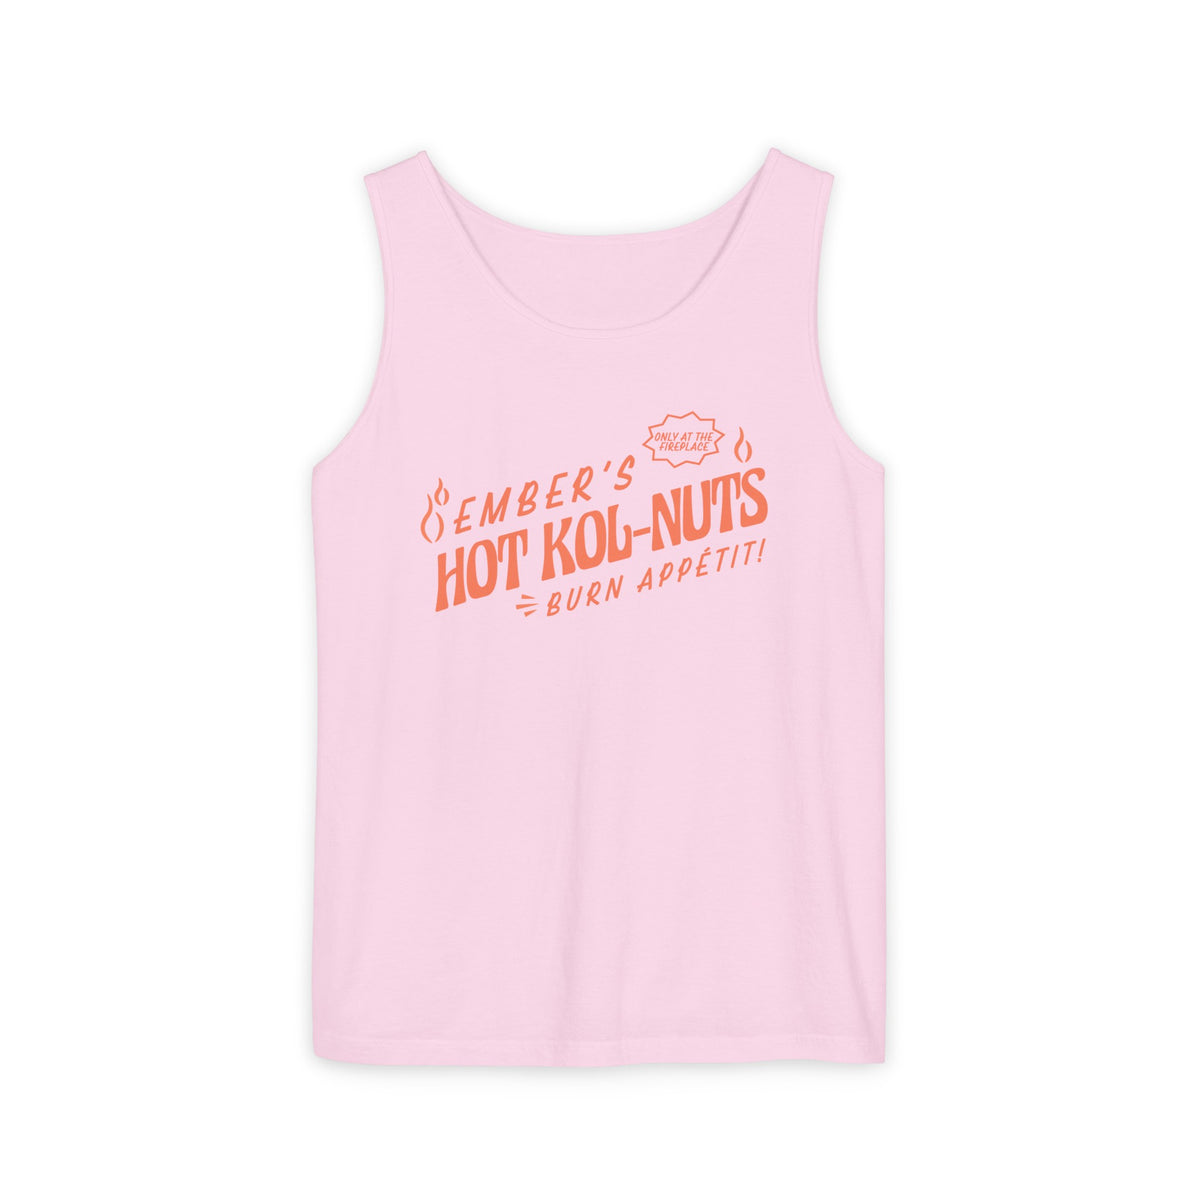 Ember's Hot Kol-Nuts Unisex Comfort Colors Garment-Dyed Tank Top